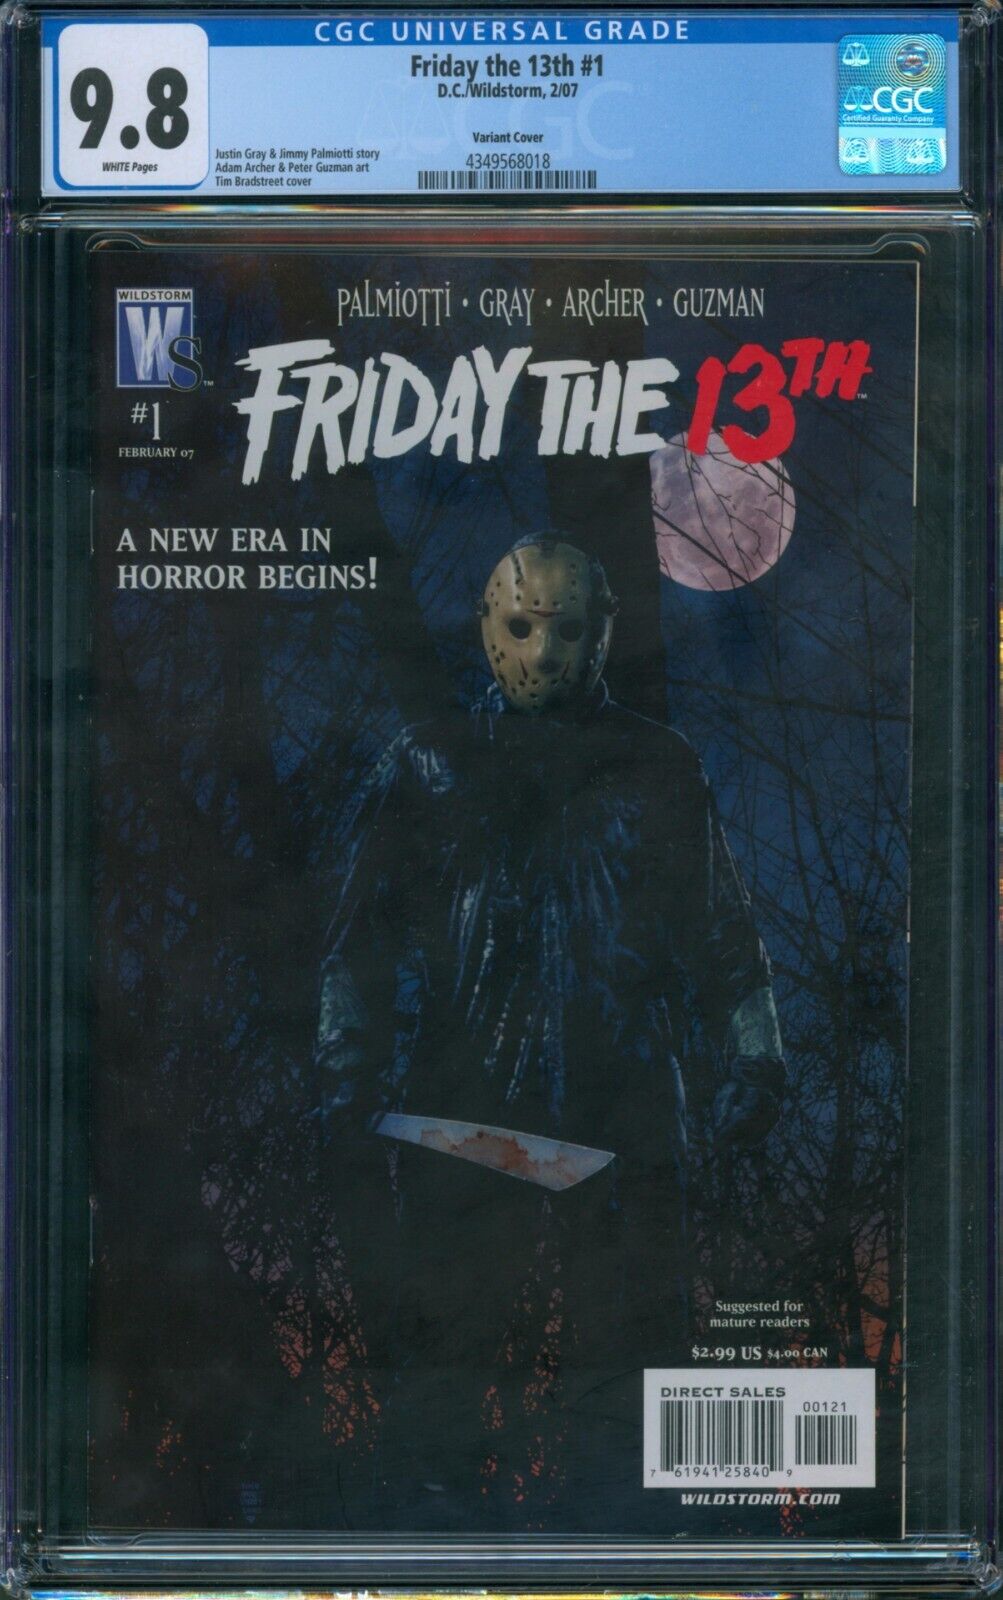 FRIDAY THE 13TH #1 ⭐ CGC 9.8 ⭐ Tim Bradstreet Variant Cover DC Wildstorm 2007